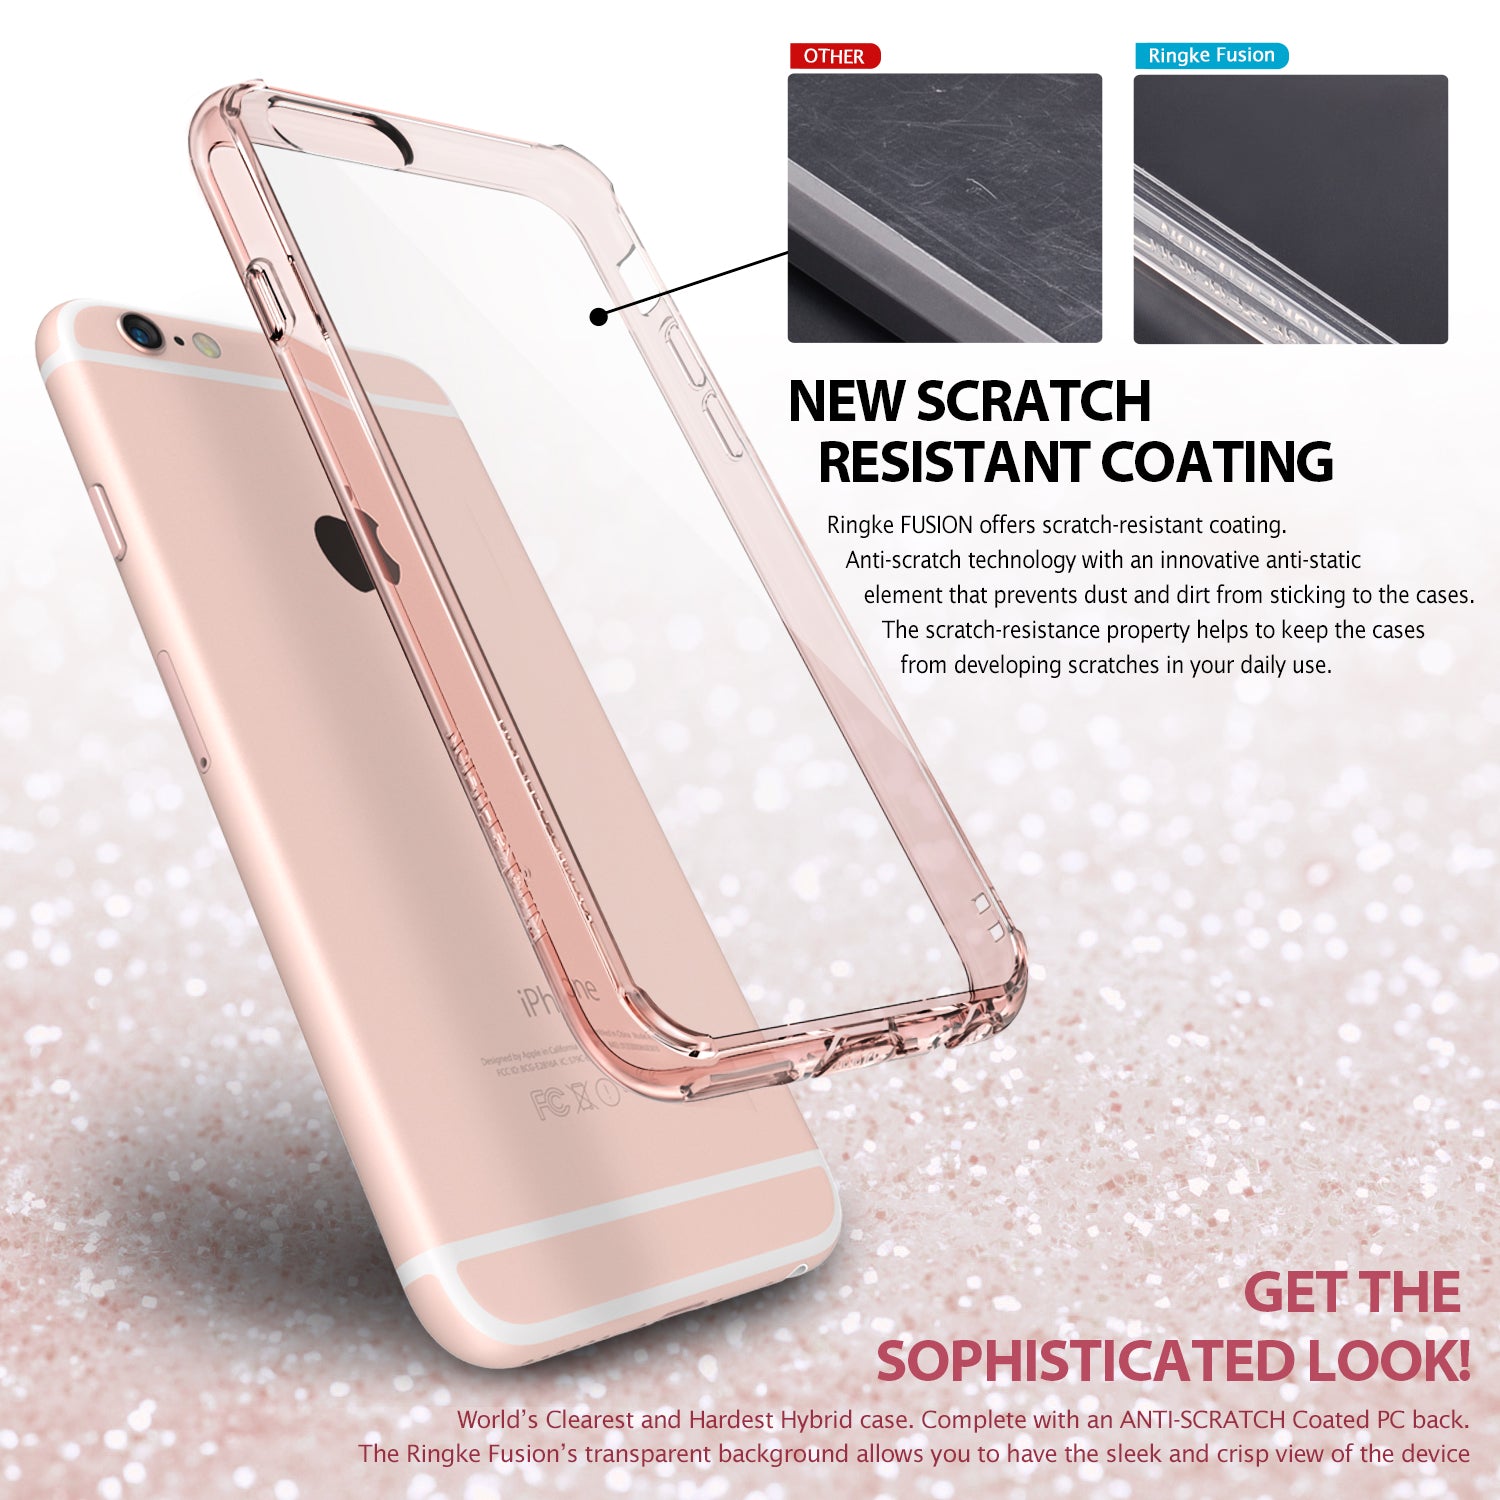 iPhone 6s Case | Fusion - New Scratch Resistant Coating